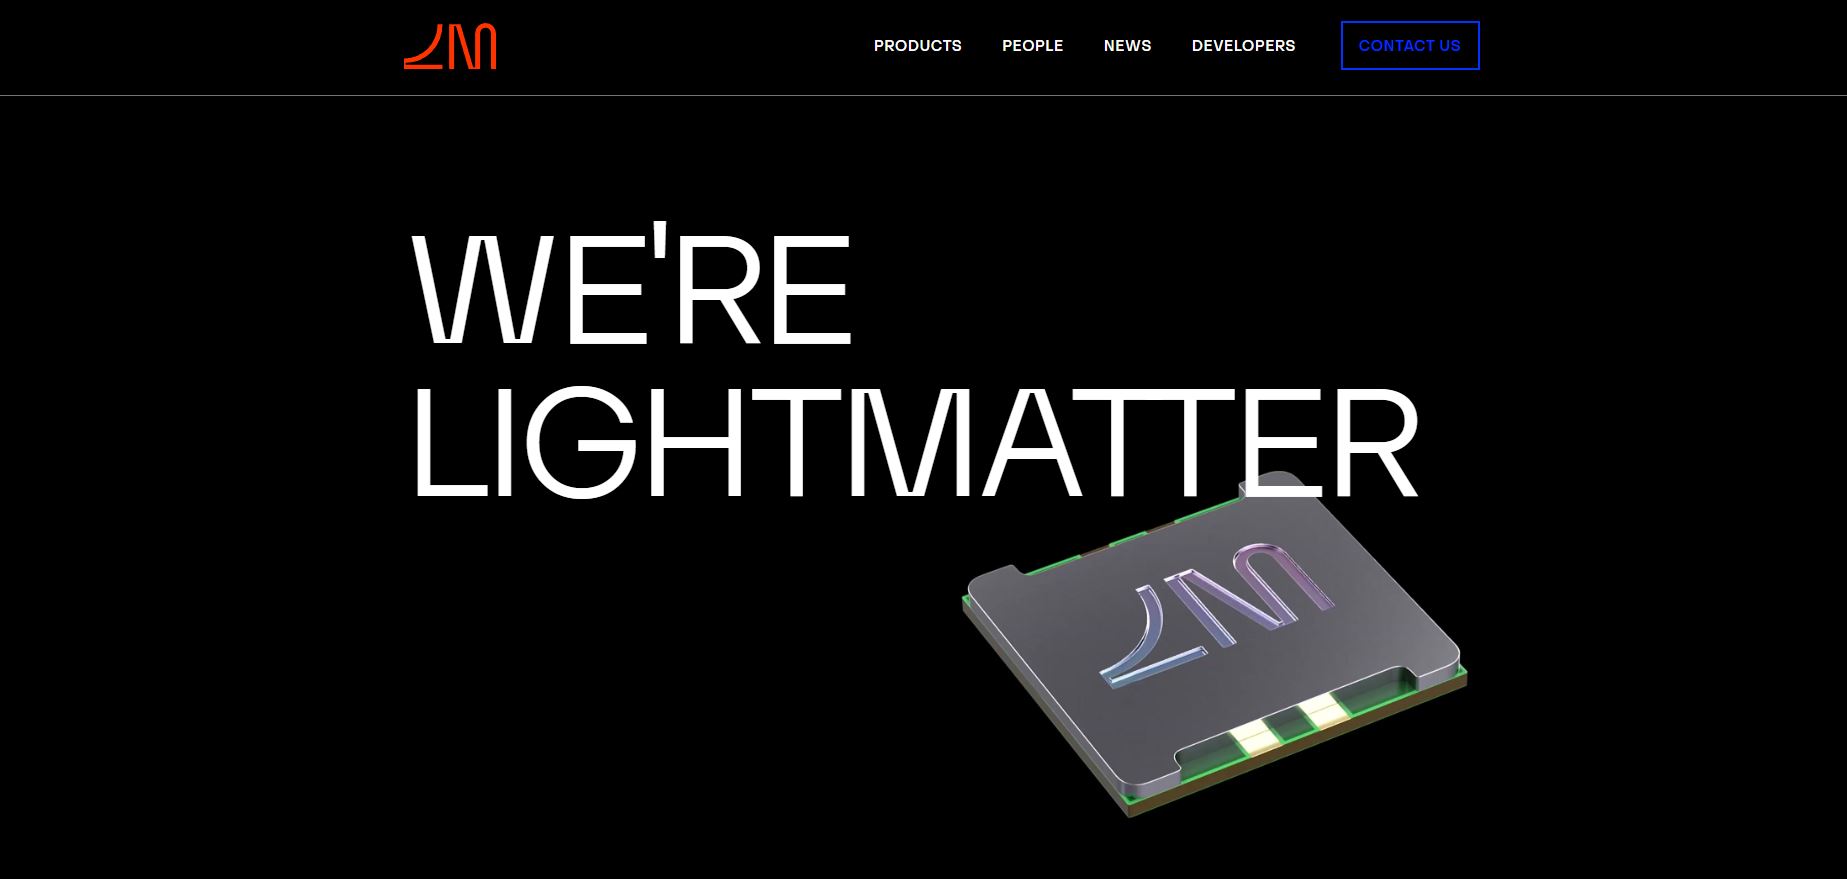 Introducing Lightmatter, the photonic (super)computer company backed by an impressive $154 million from investors